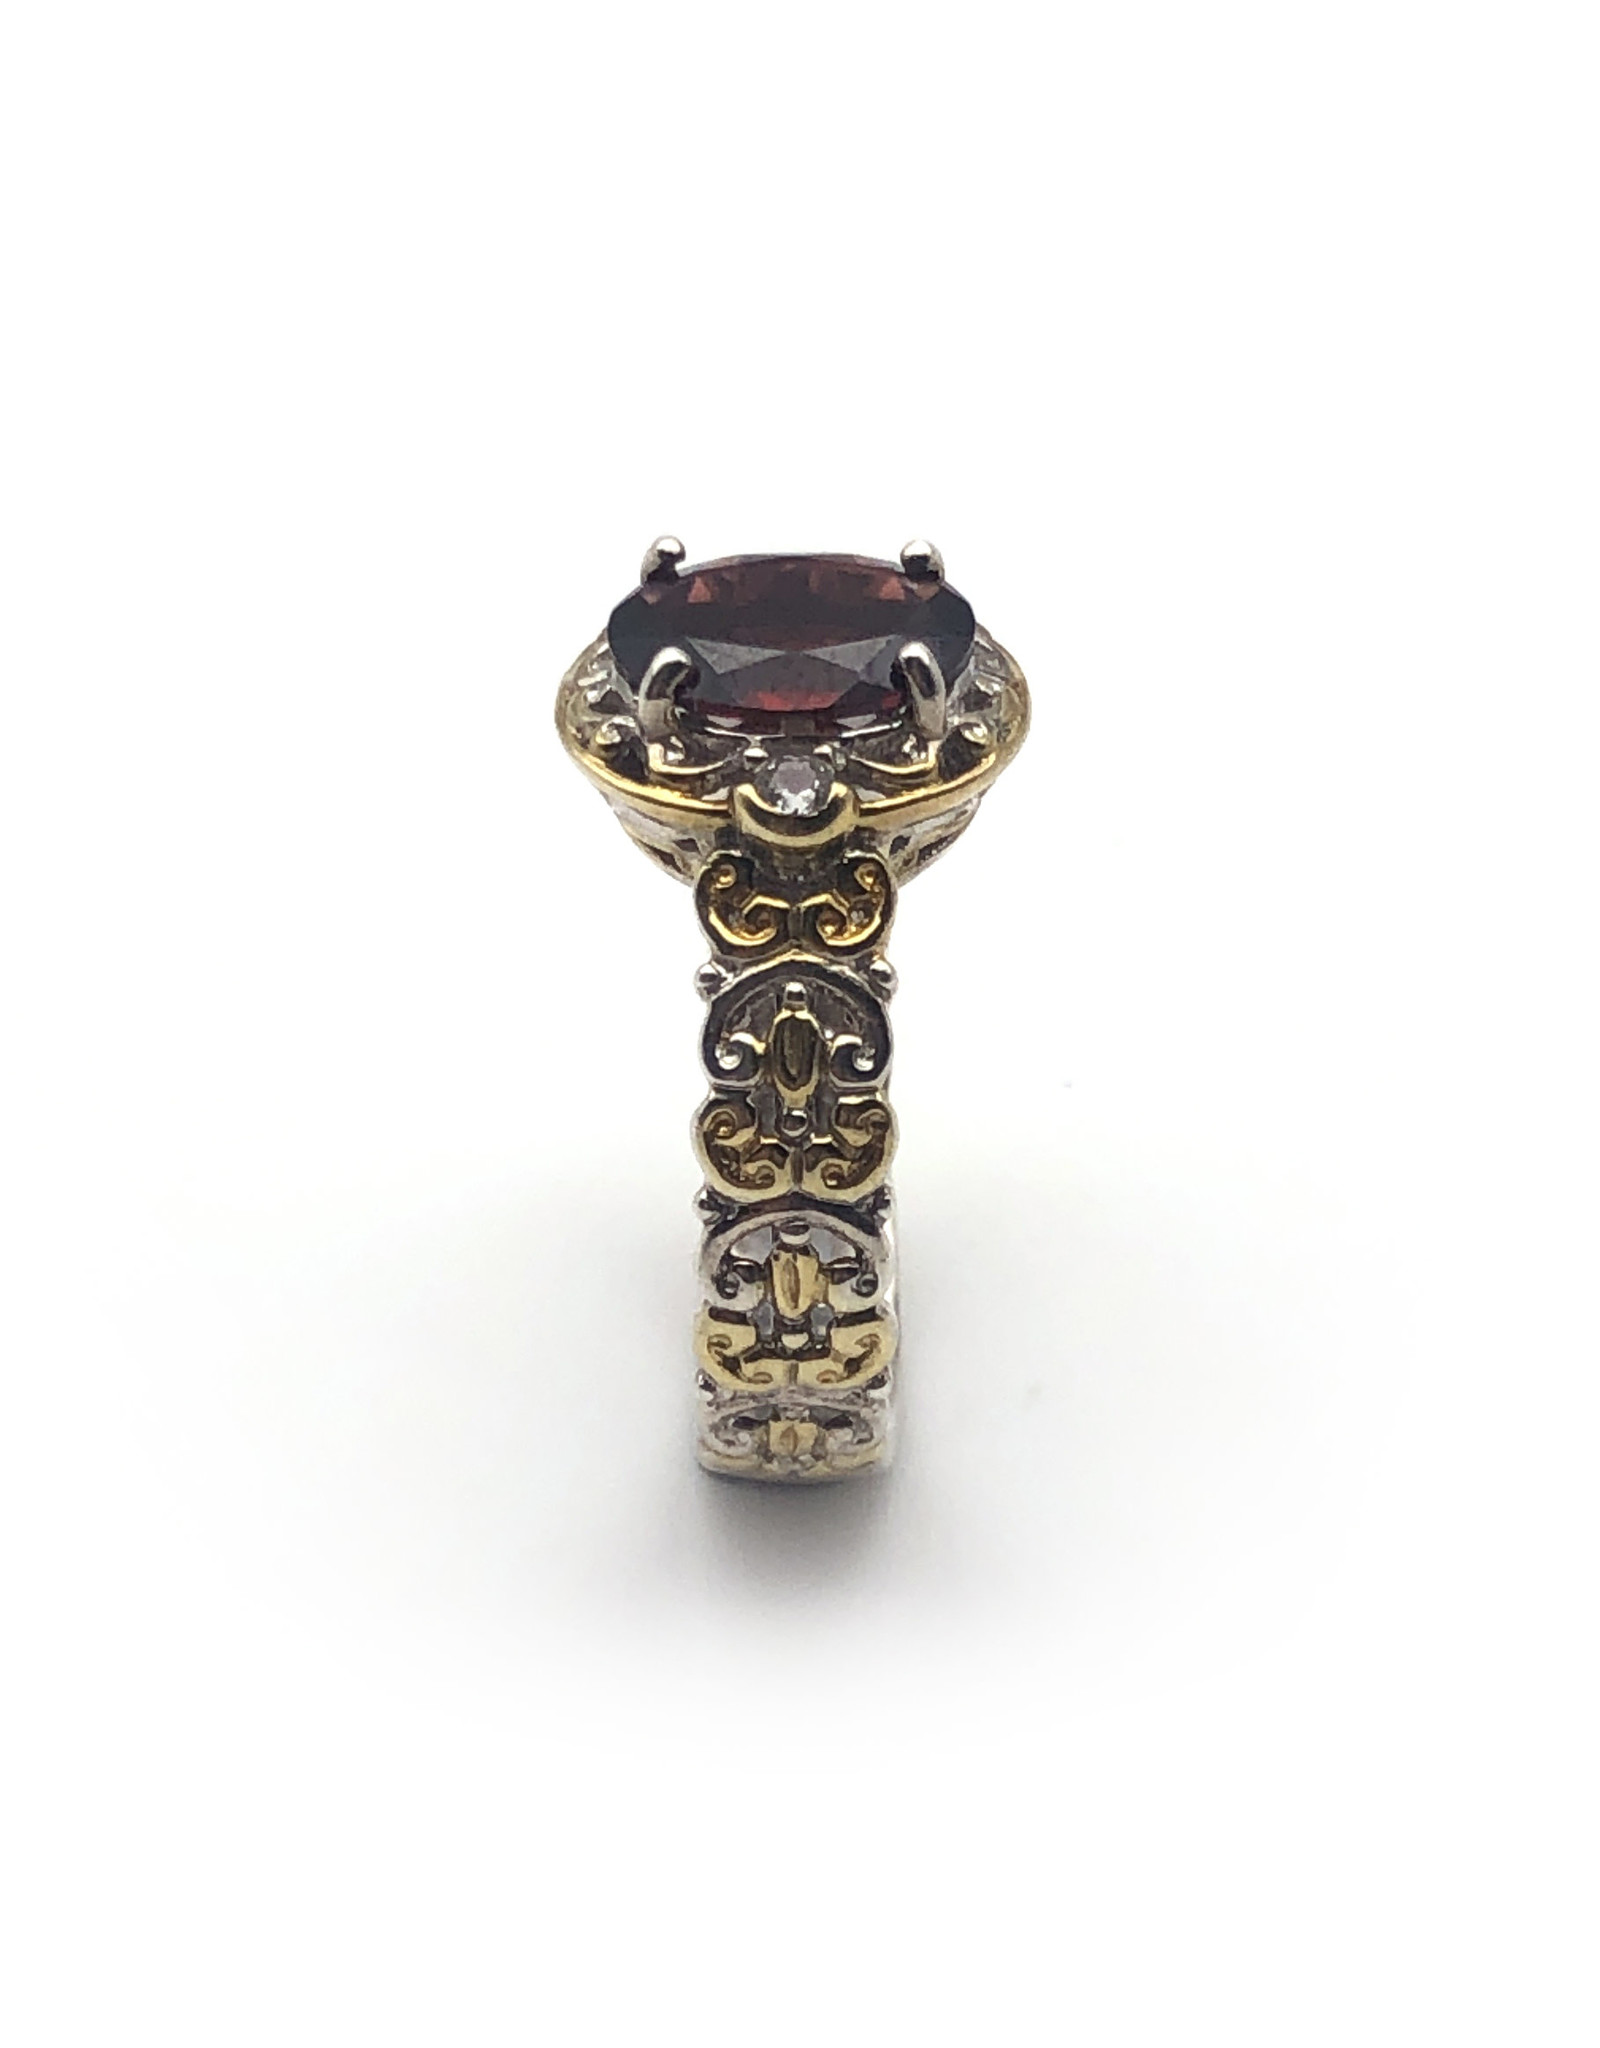 Ornate Sterling Ring with Pyrope and 2 Small Colorless Gems